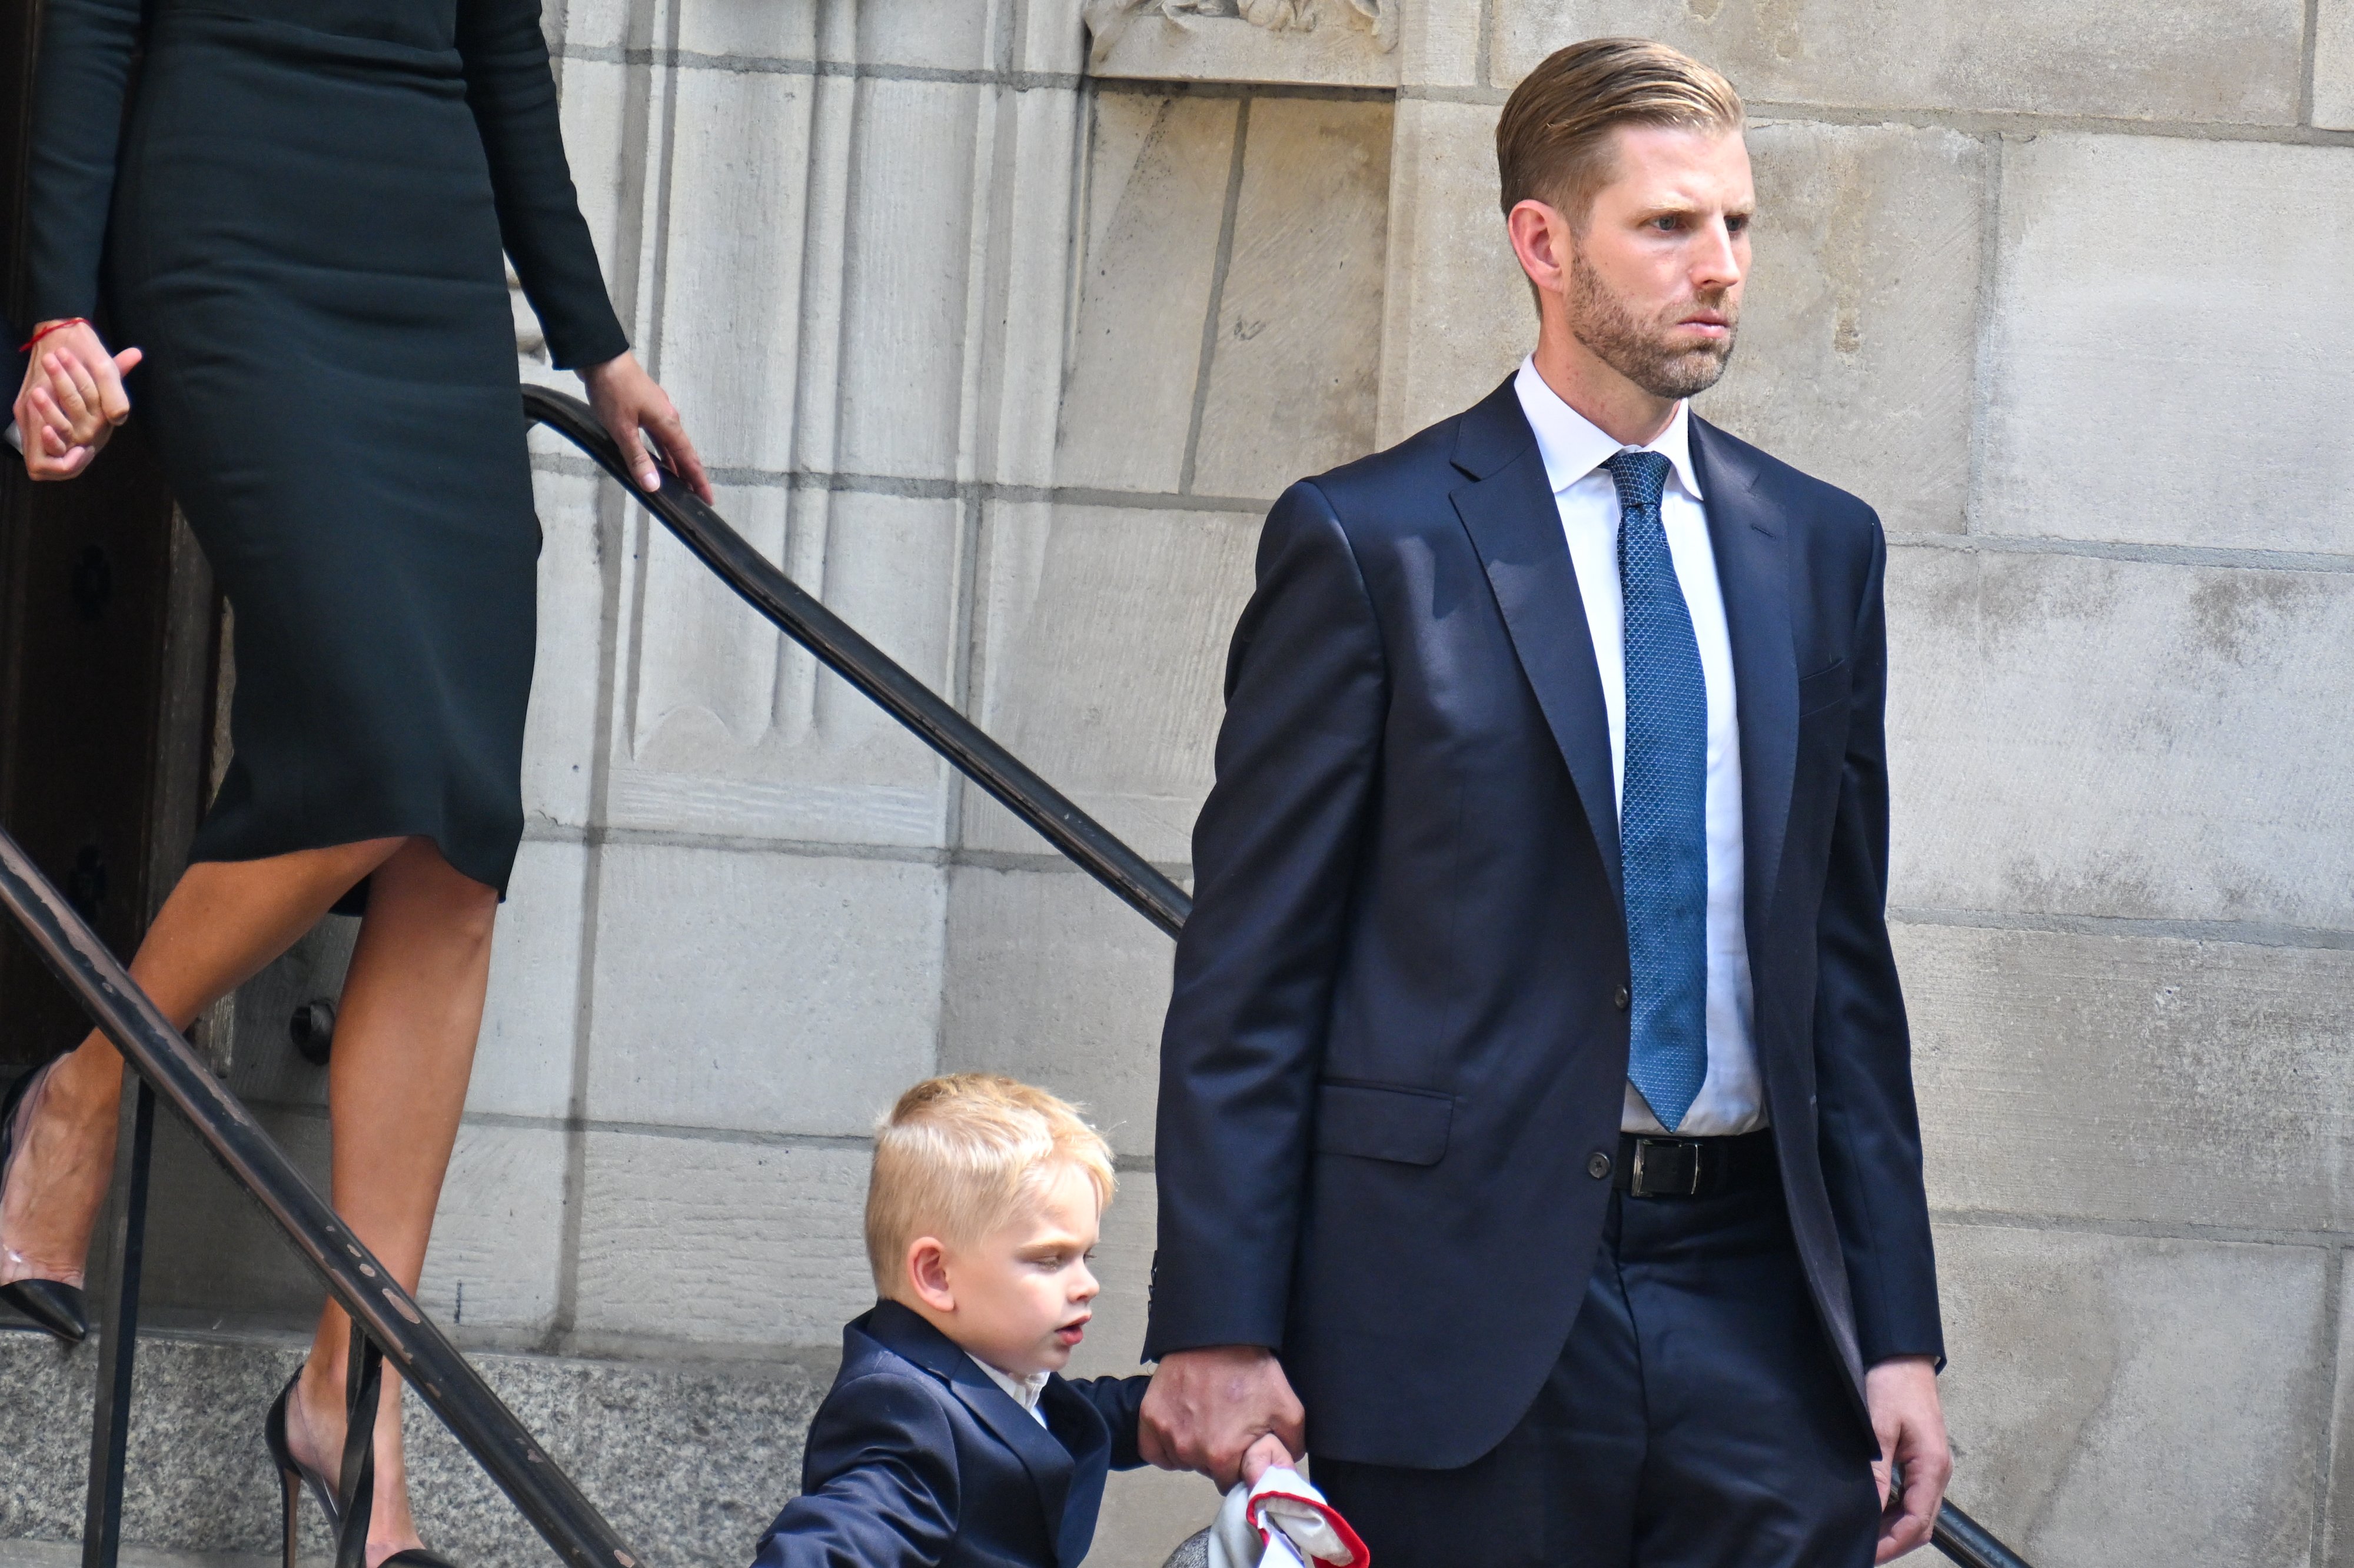 Eric Trump photographed exiting the funeral of his mother Ivana Trump at St. Vincent Ferrer Roman Catholic Church July 20, 2022 in New York City.┃Source: Getty Images